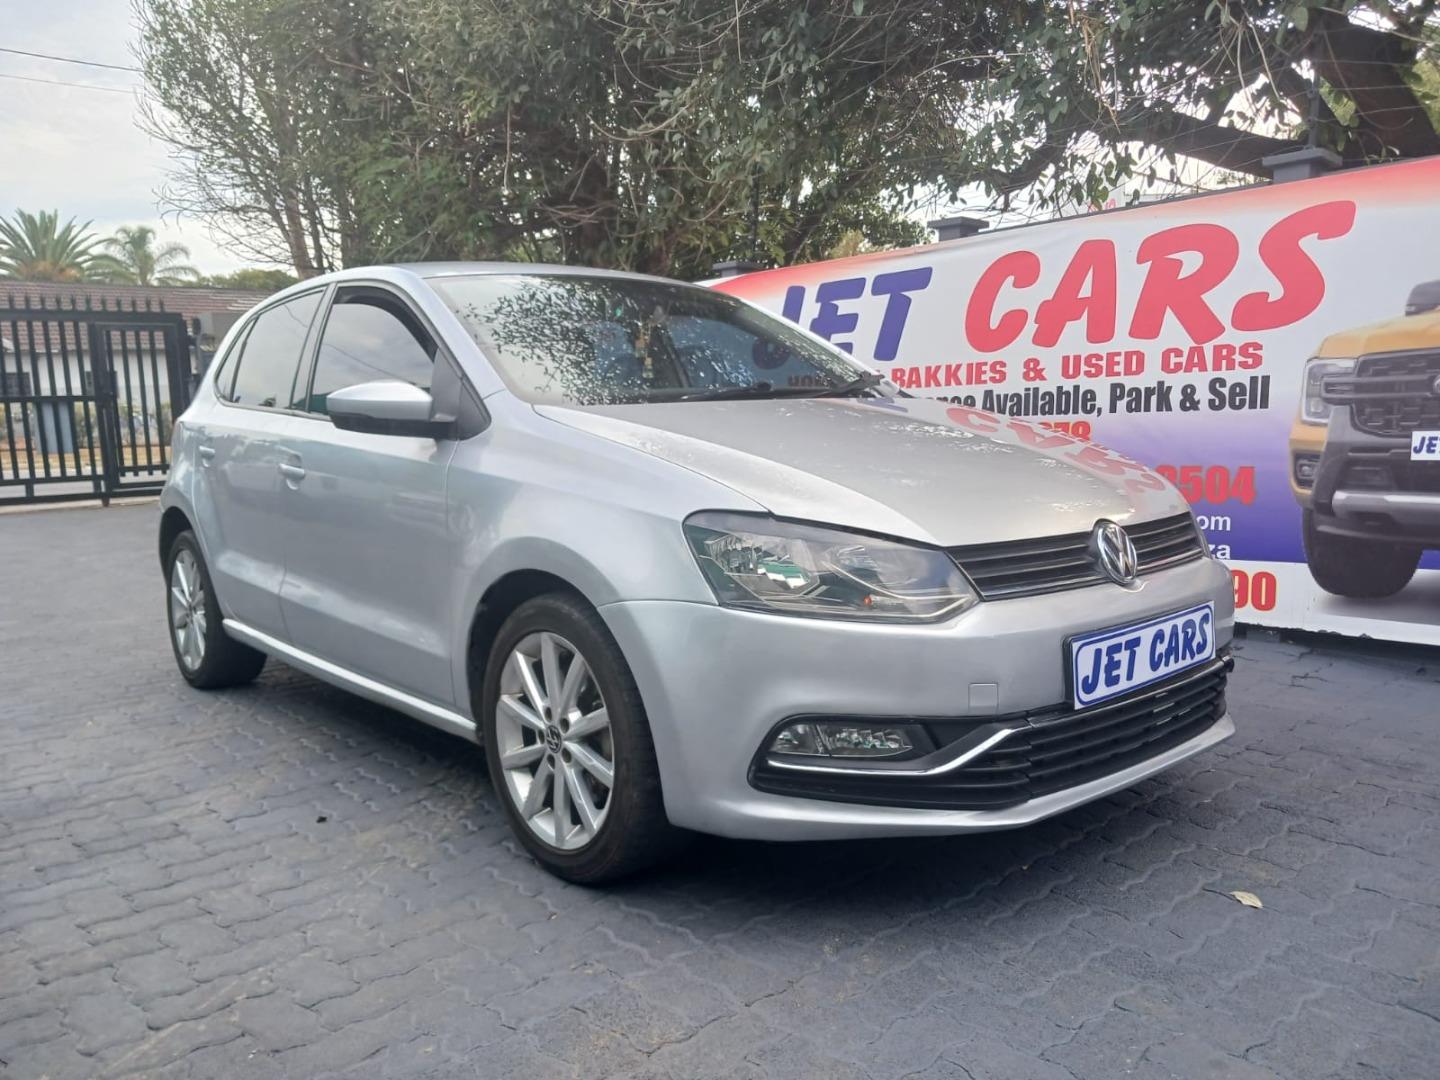 2015 Volkswagen Polo Hatch 1.2TSI Highline Auto For Sale